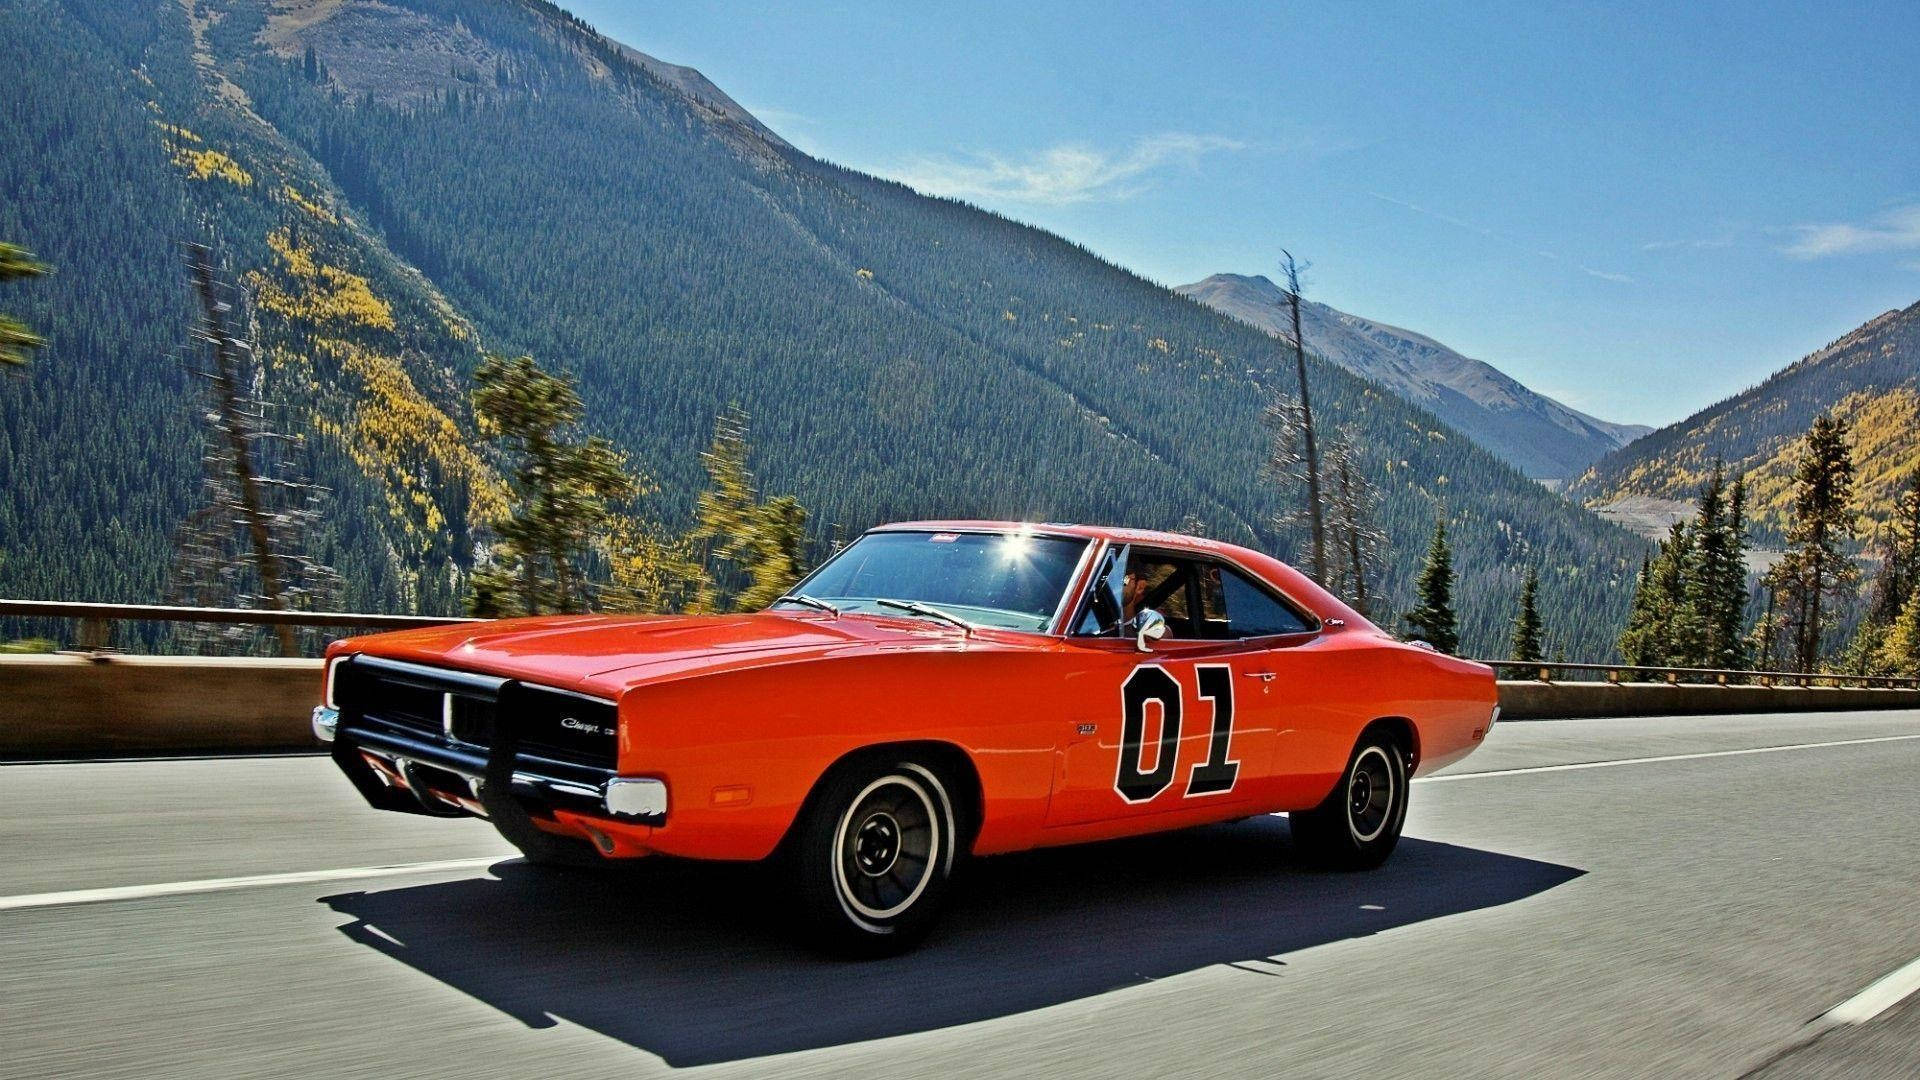 General Lee Running On The Road Wallpaper